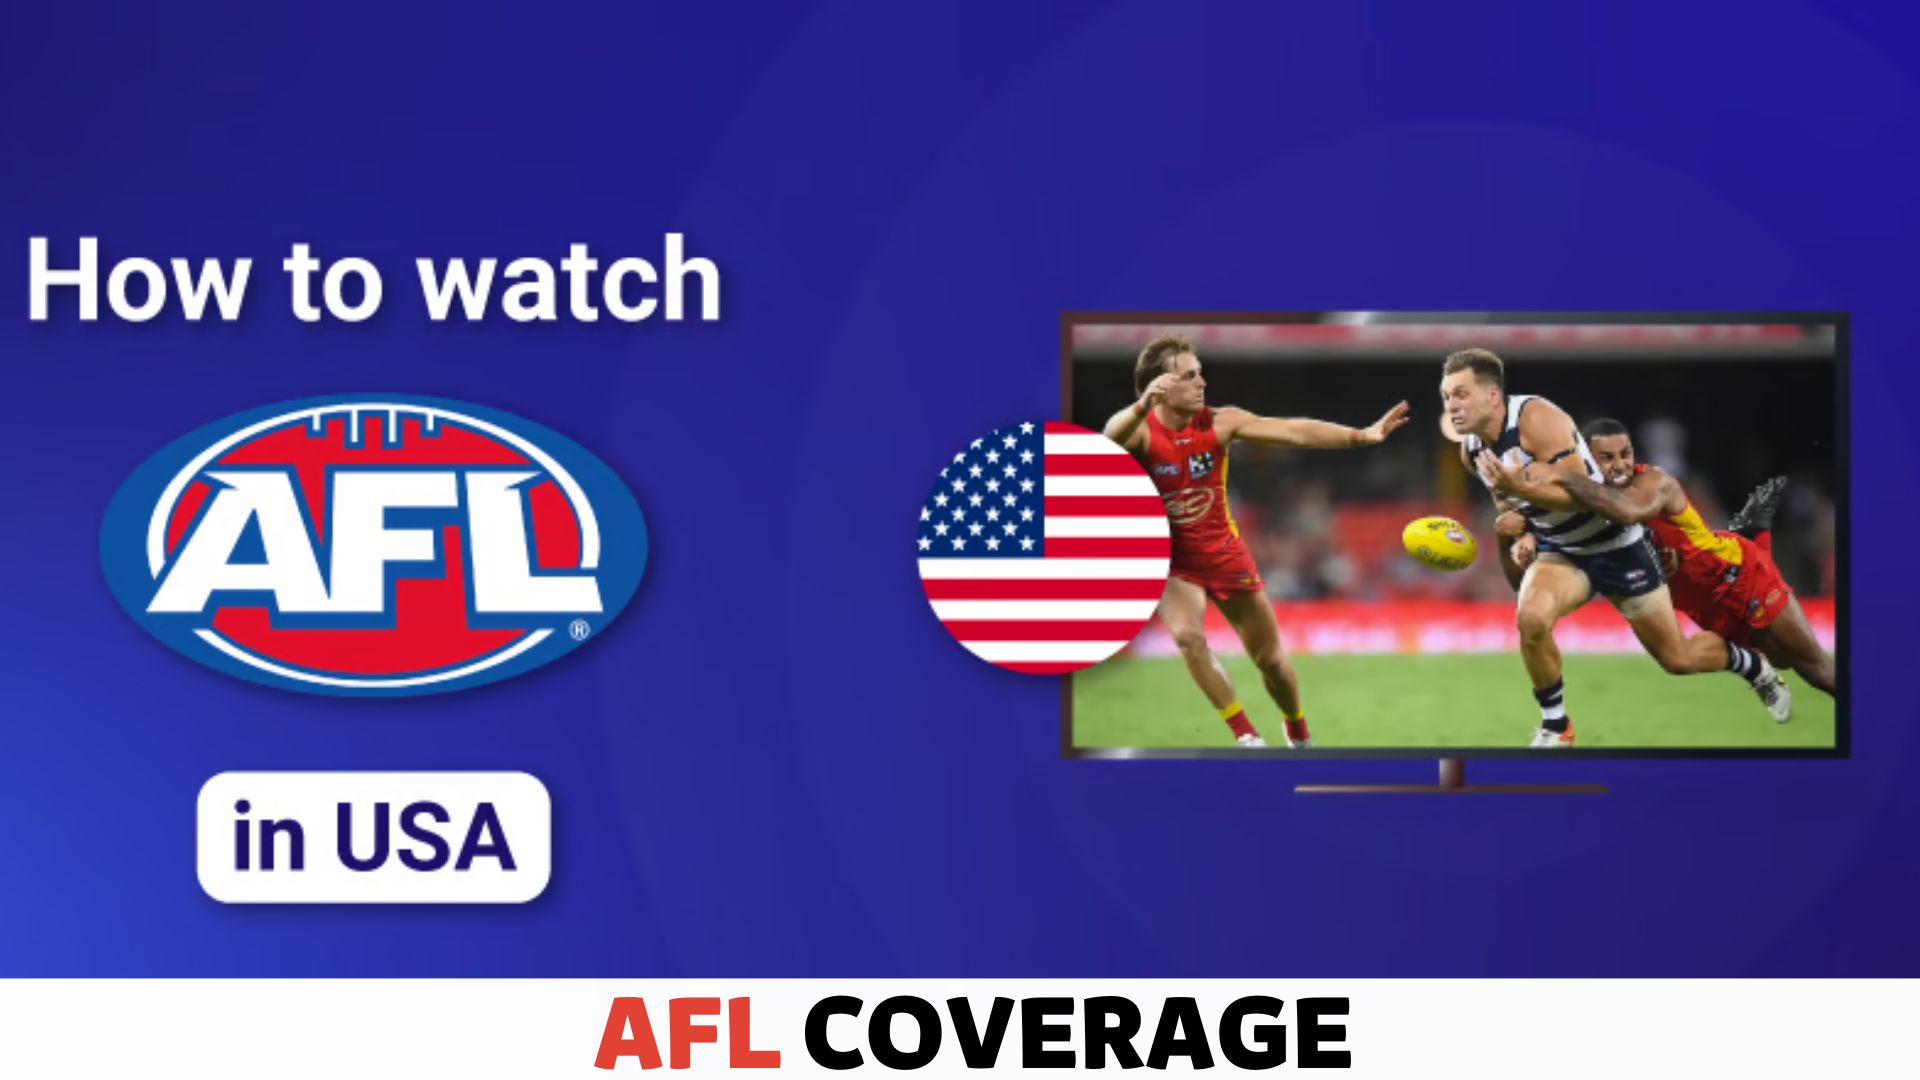 Watch AFL in the USA